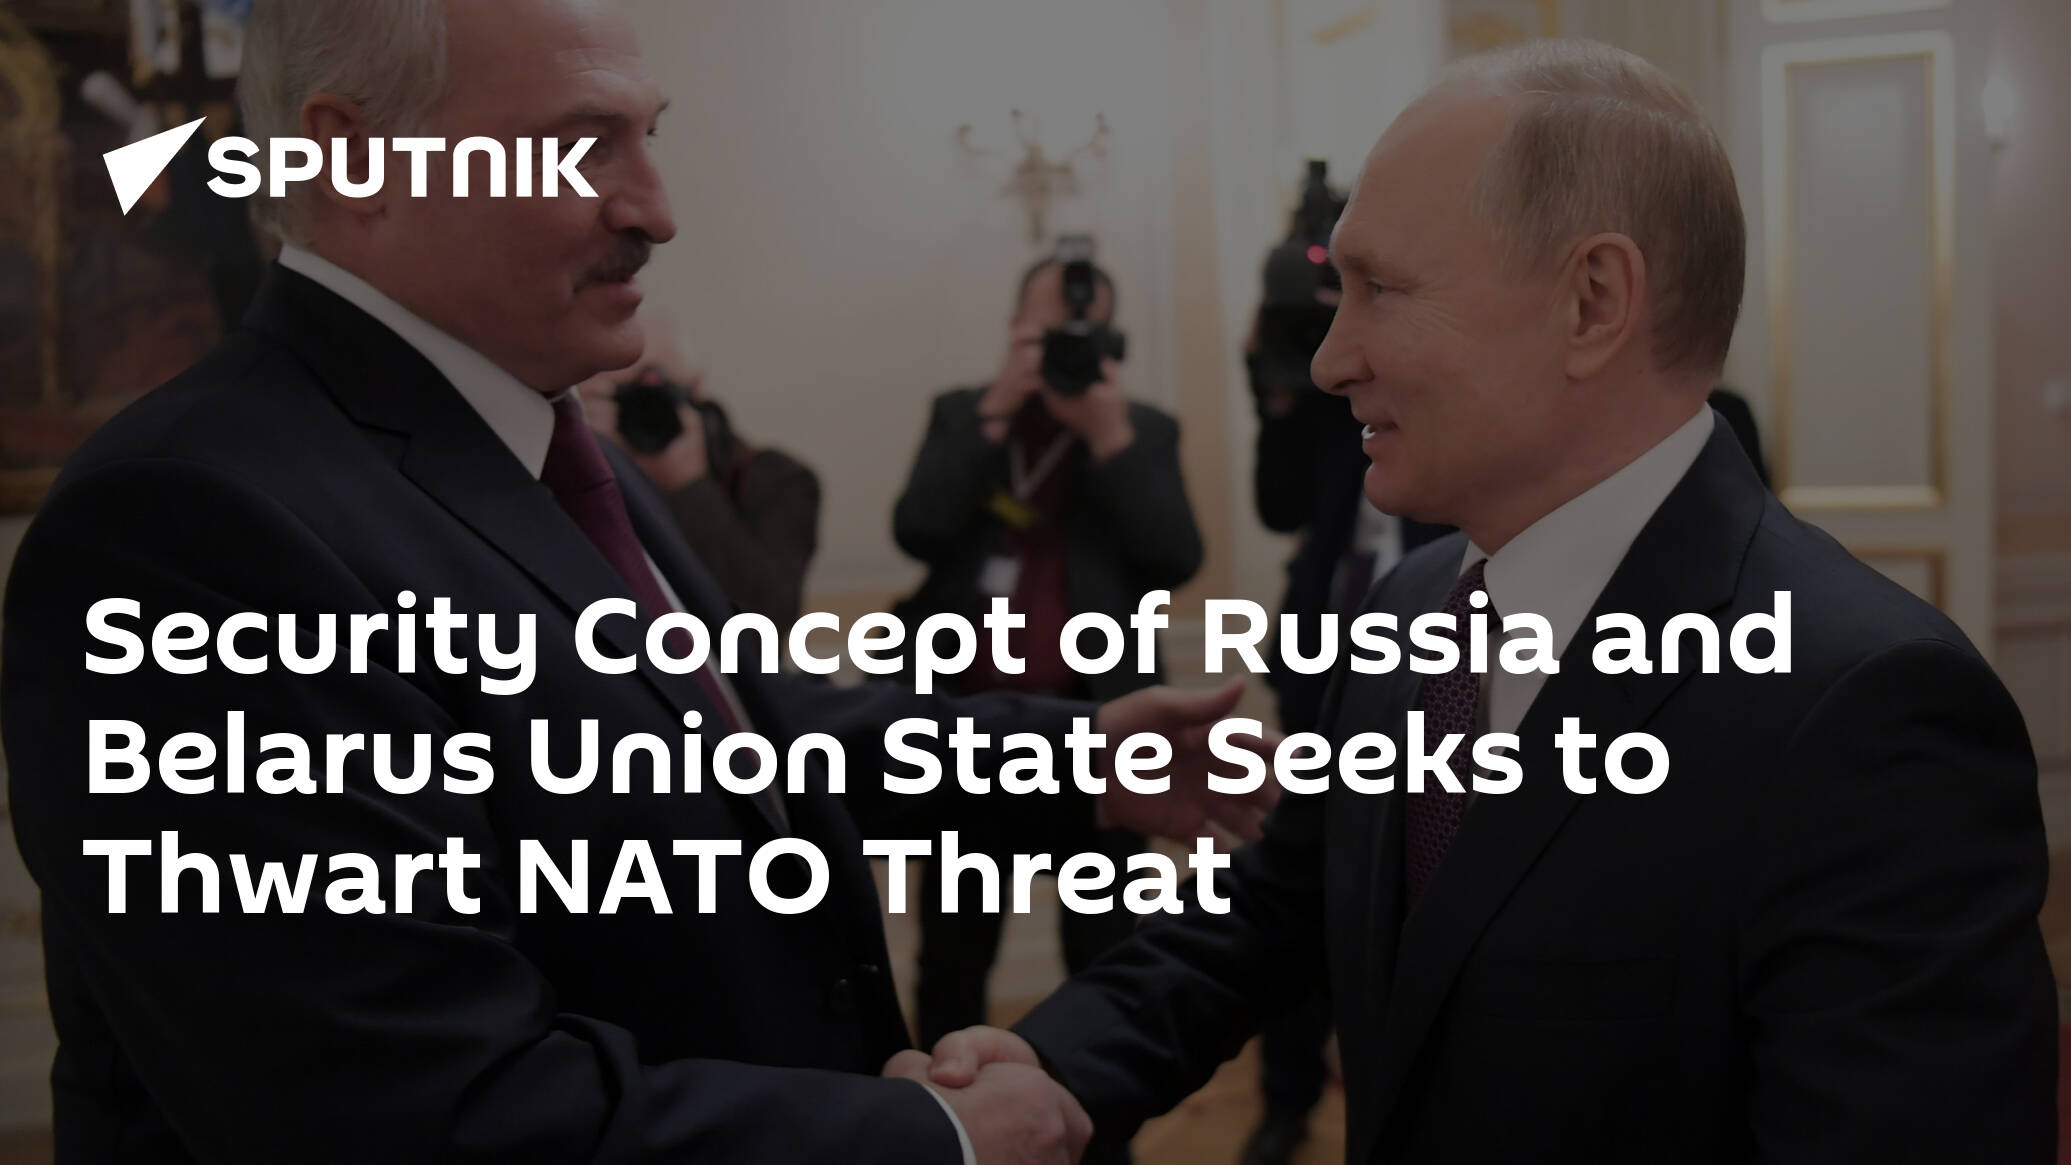 Security Concept of Russia and Belarus Union State Seeks to Thwart NATO Threat